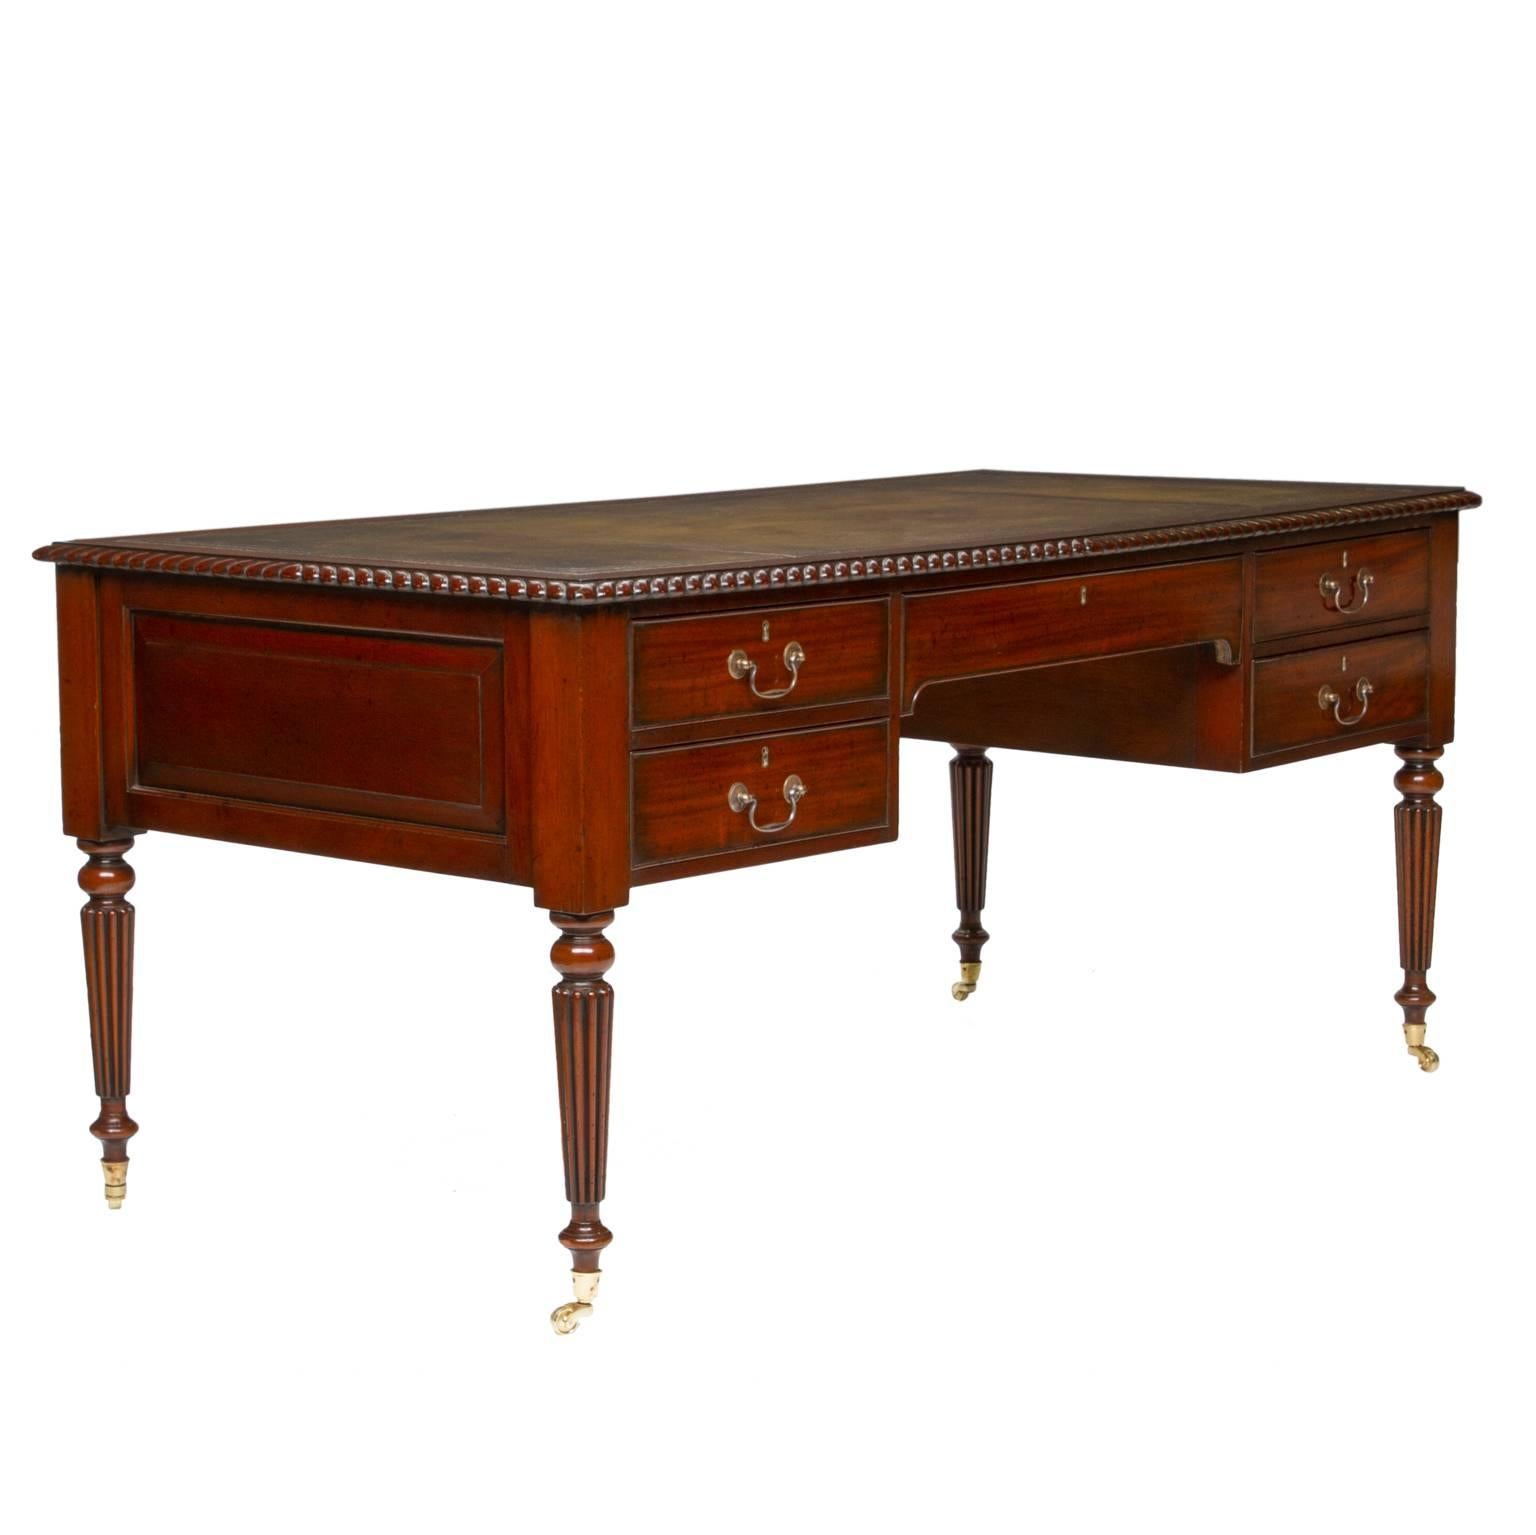 This is a handsome Regency writing desk from England. The top has a wonderful tooled leather top. The sides are raised panels from solid boards of mahogany. There is one functional side and false front side but framed to look as if it’s a partner’s